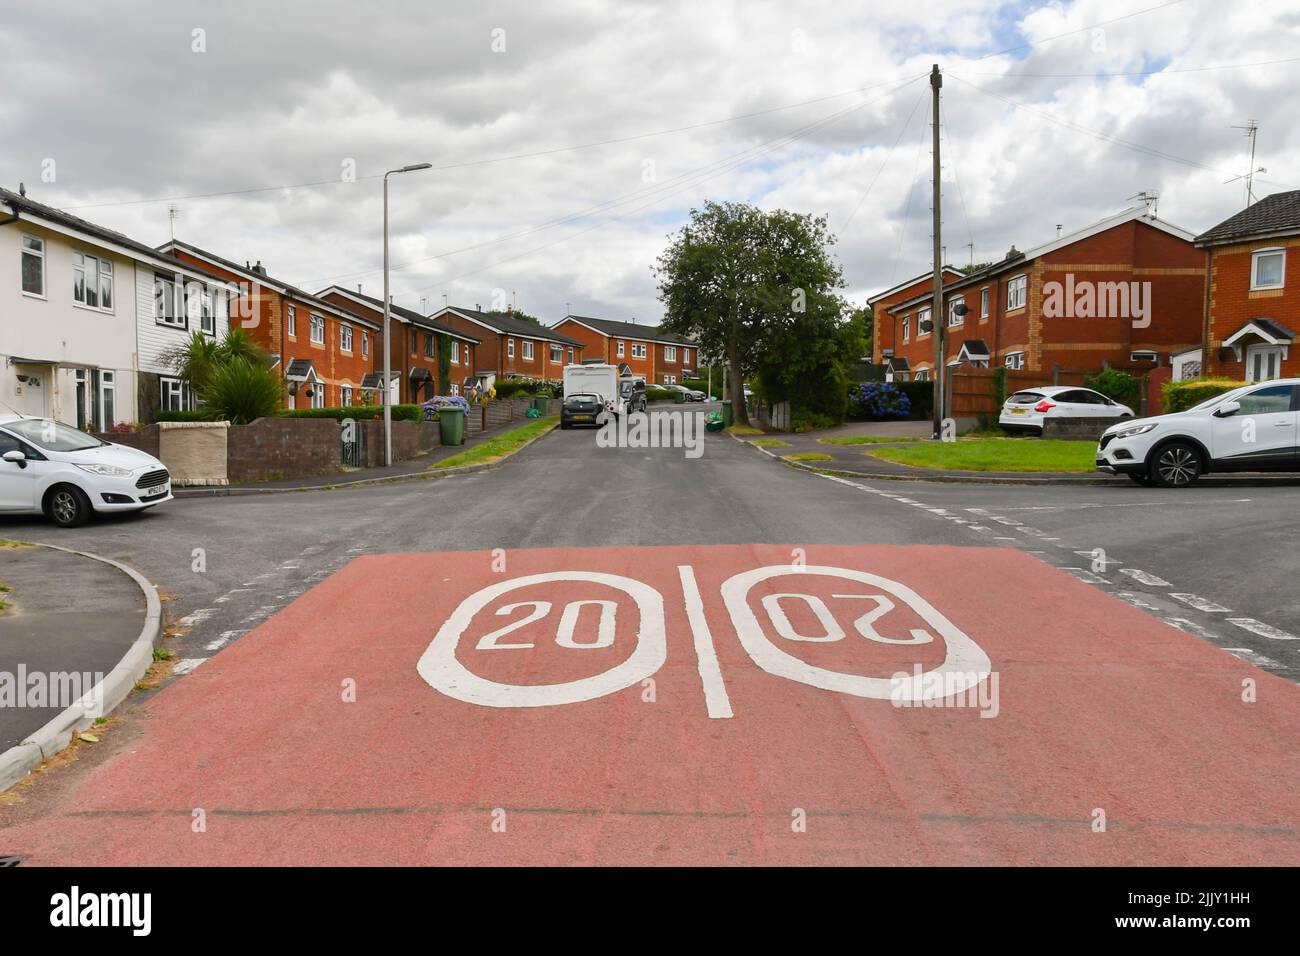 Llantrisant, Wales - July 2022: Road markings showing 20 mph speed limited painted on the street at the entrance to a housing estate. Stock Photo